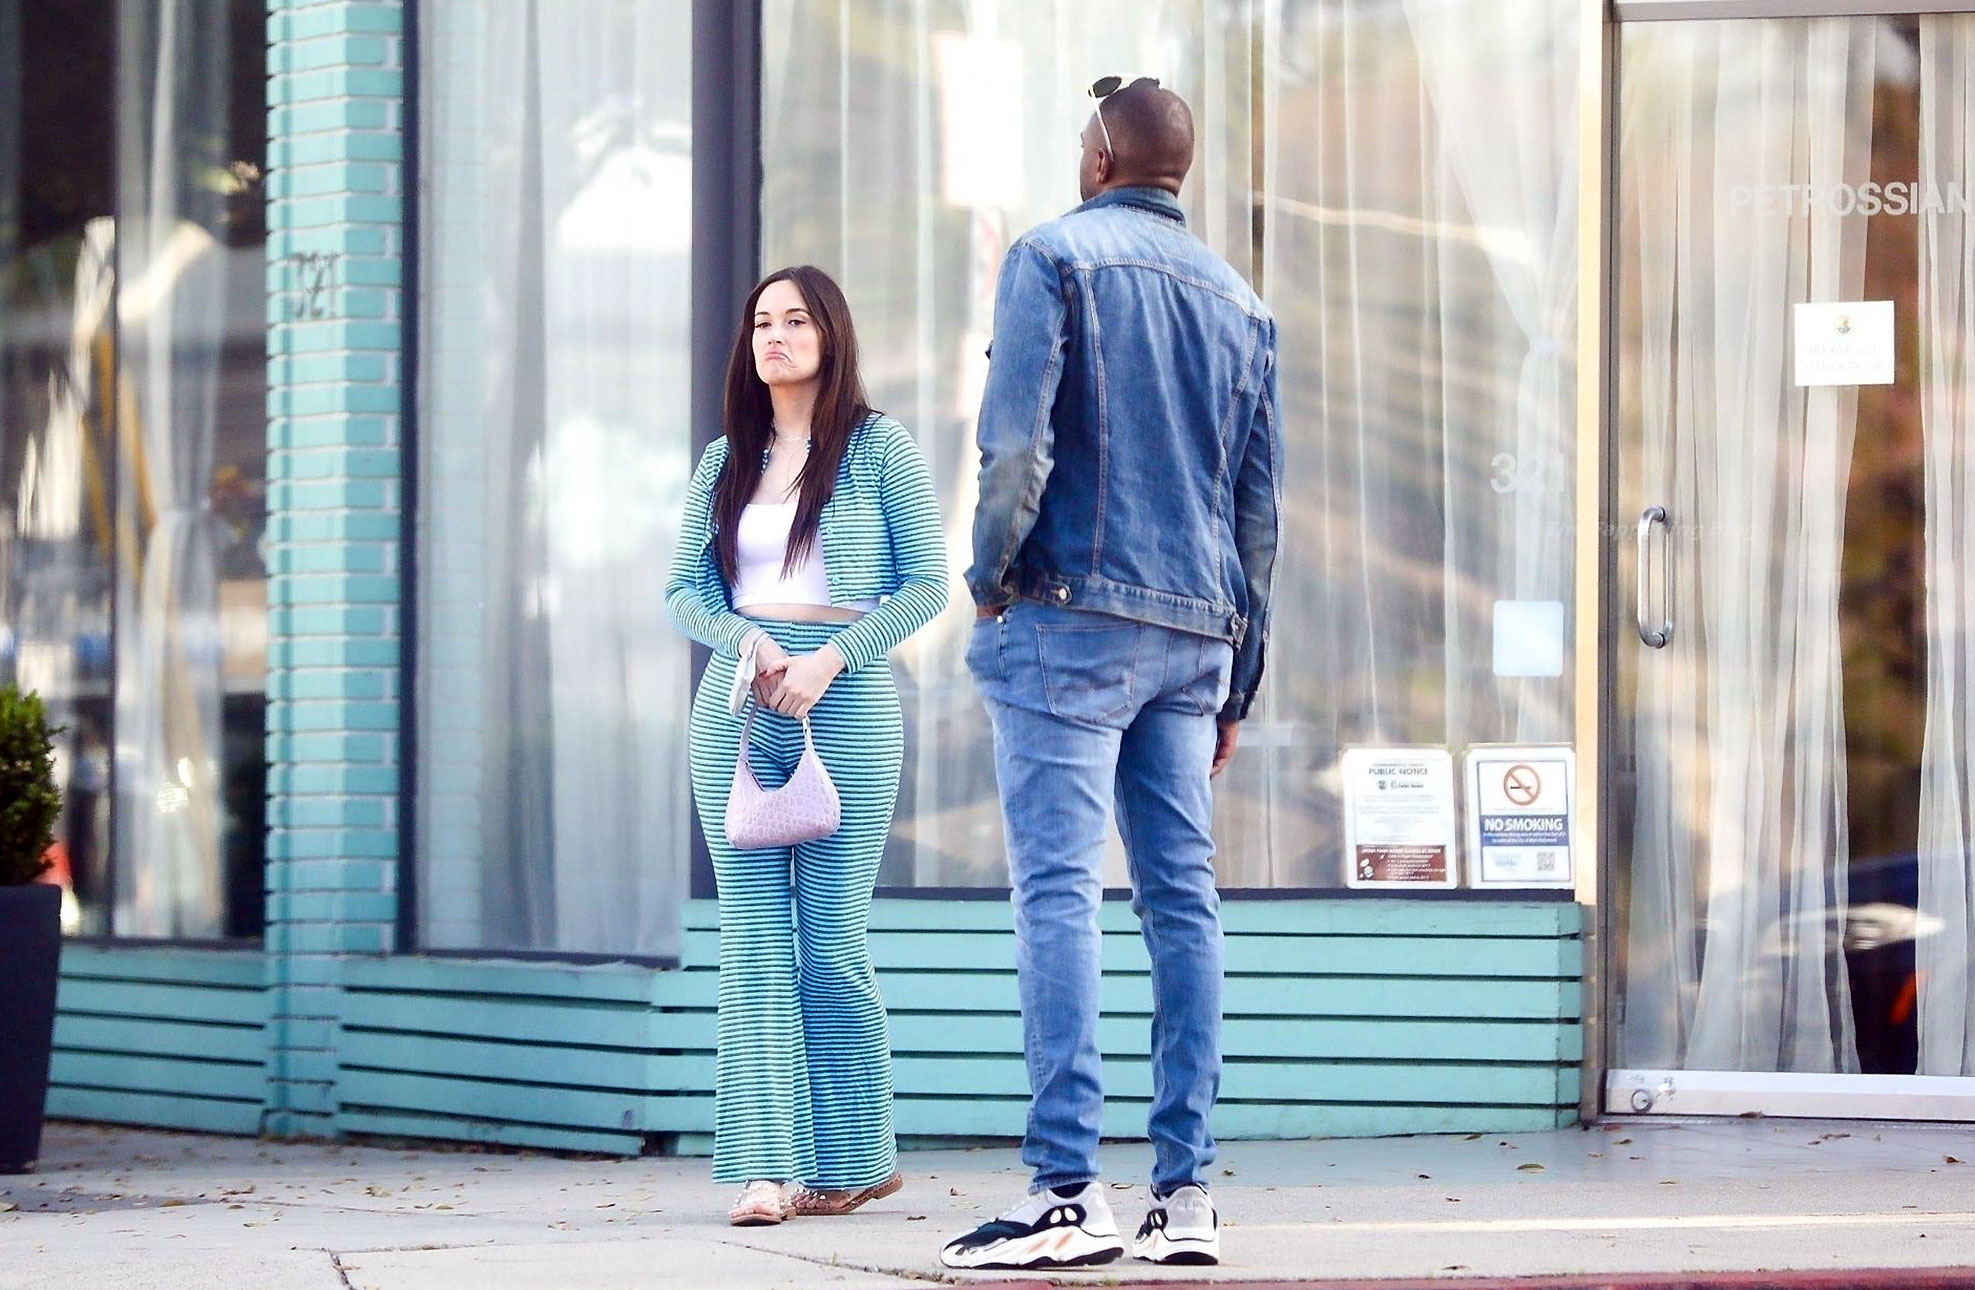 Kacey Musgraves and new Boyfriend.